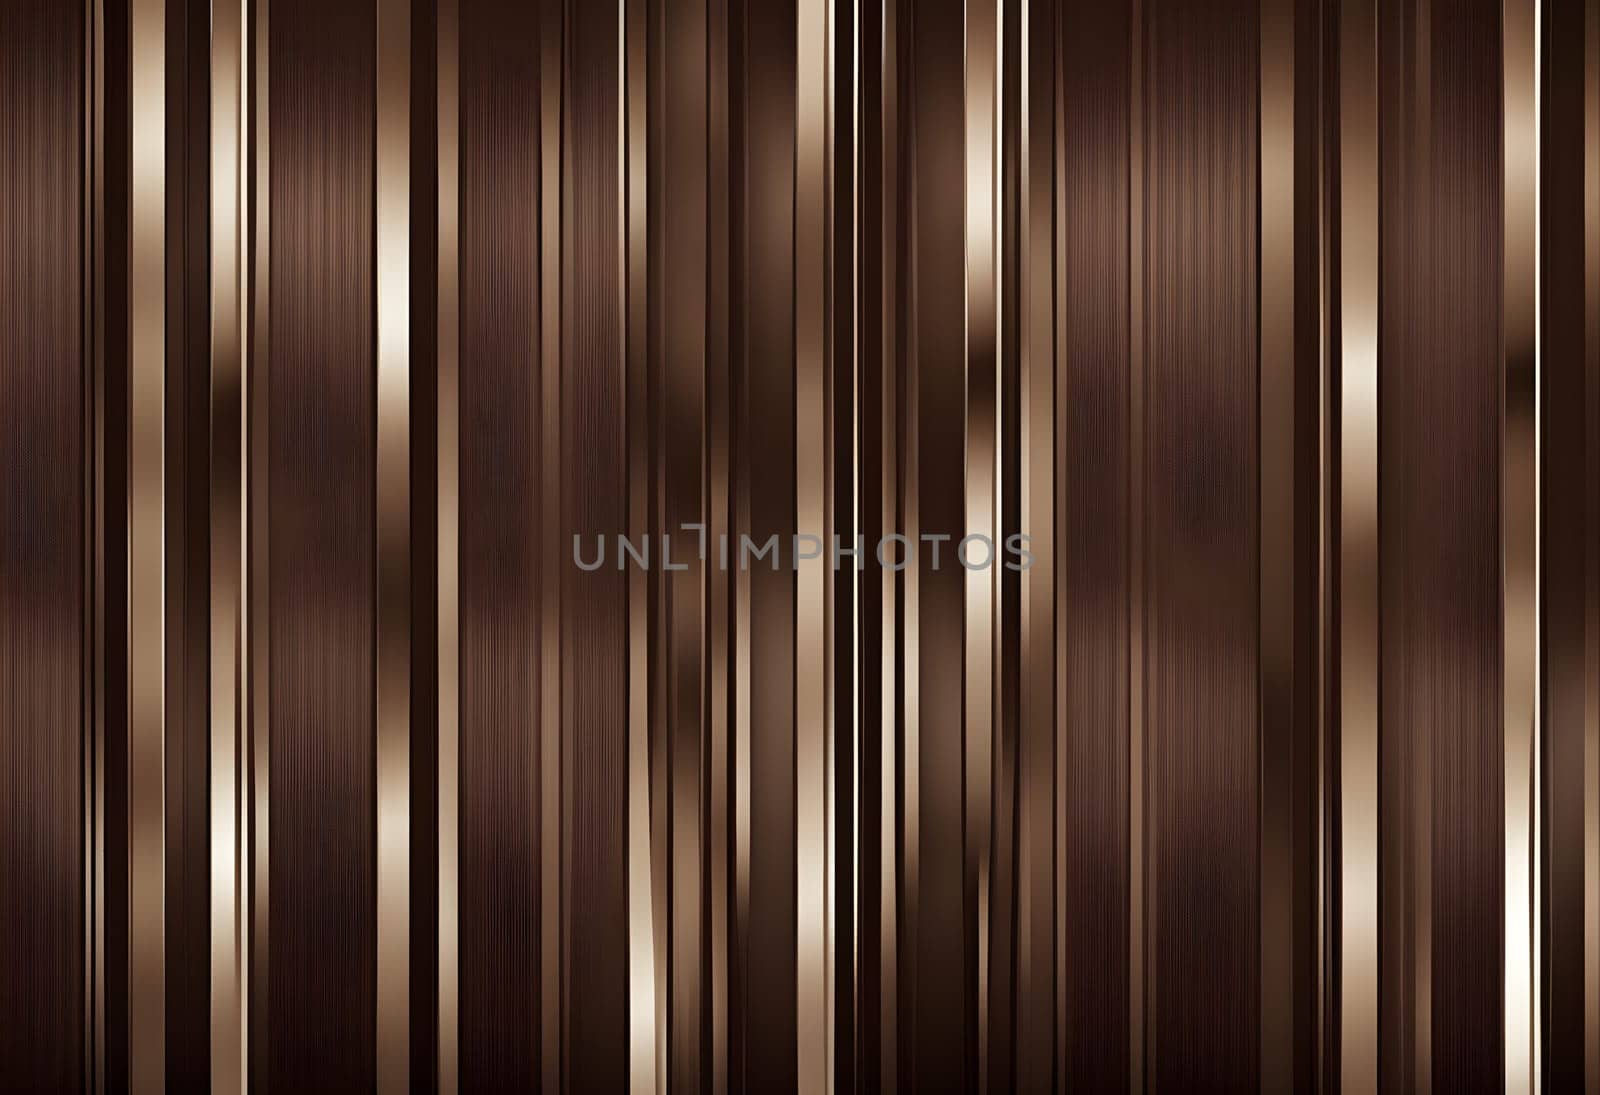 Dark modern style, minimalistic pattern of vertical metallic shiny stripes on brown background, editable multipurpose abstract background design in wide range, creative template for web by rostik924